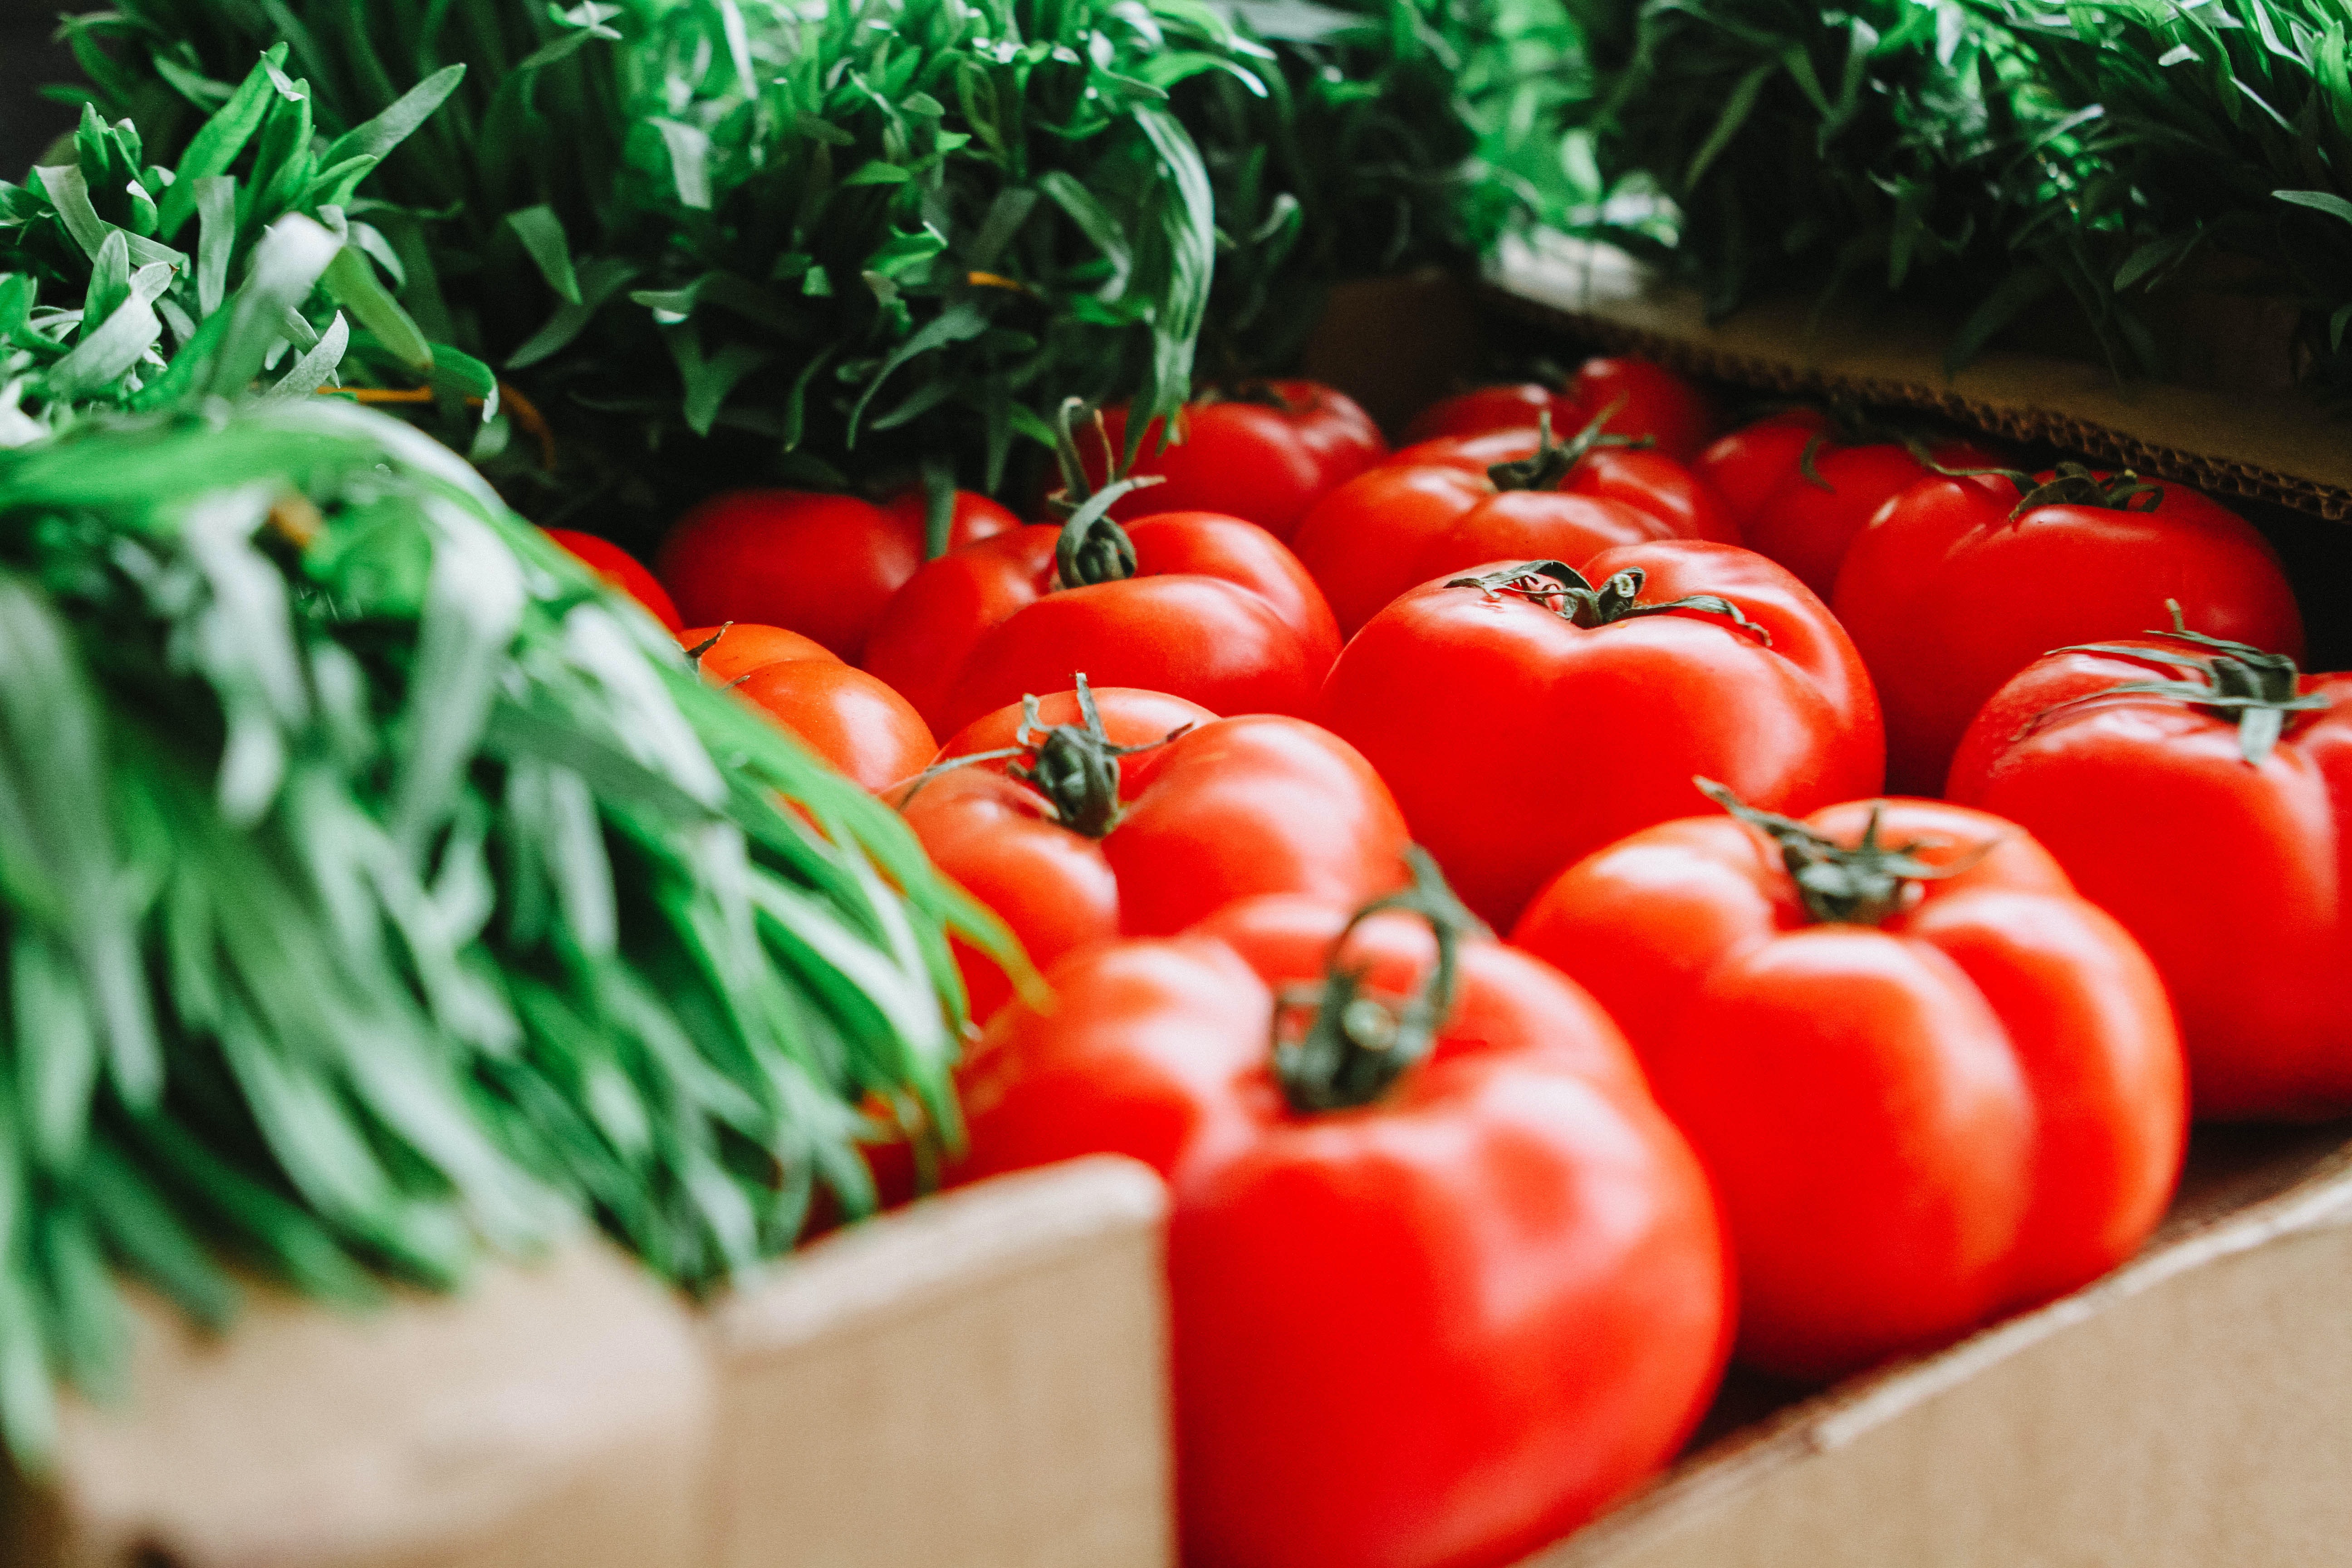 Tomato: A Key Player in Africa and GCC Trade Opportunities